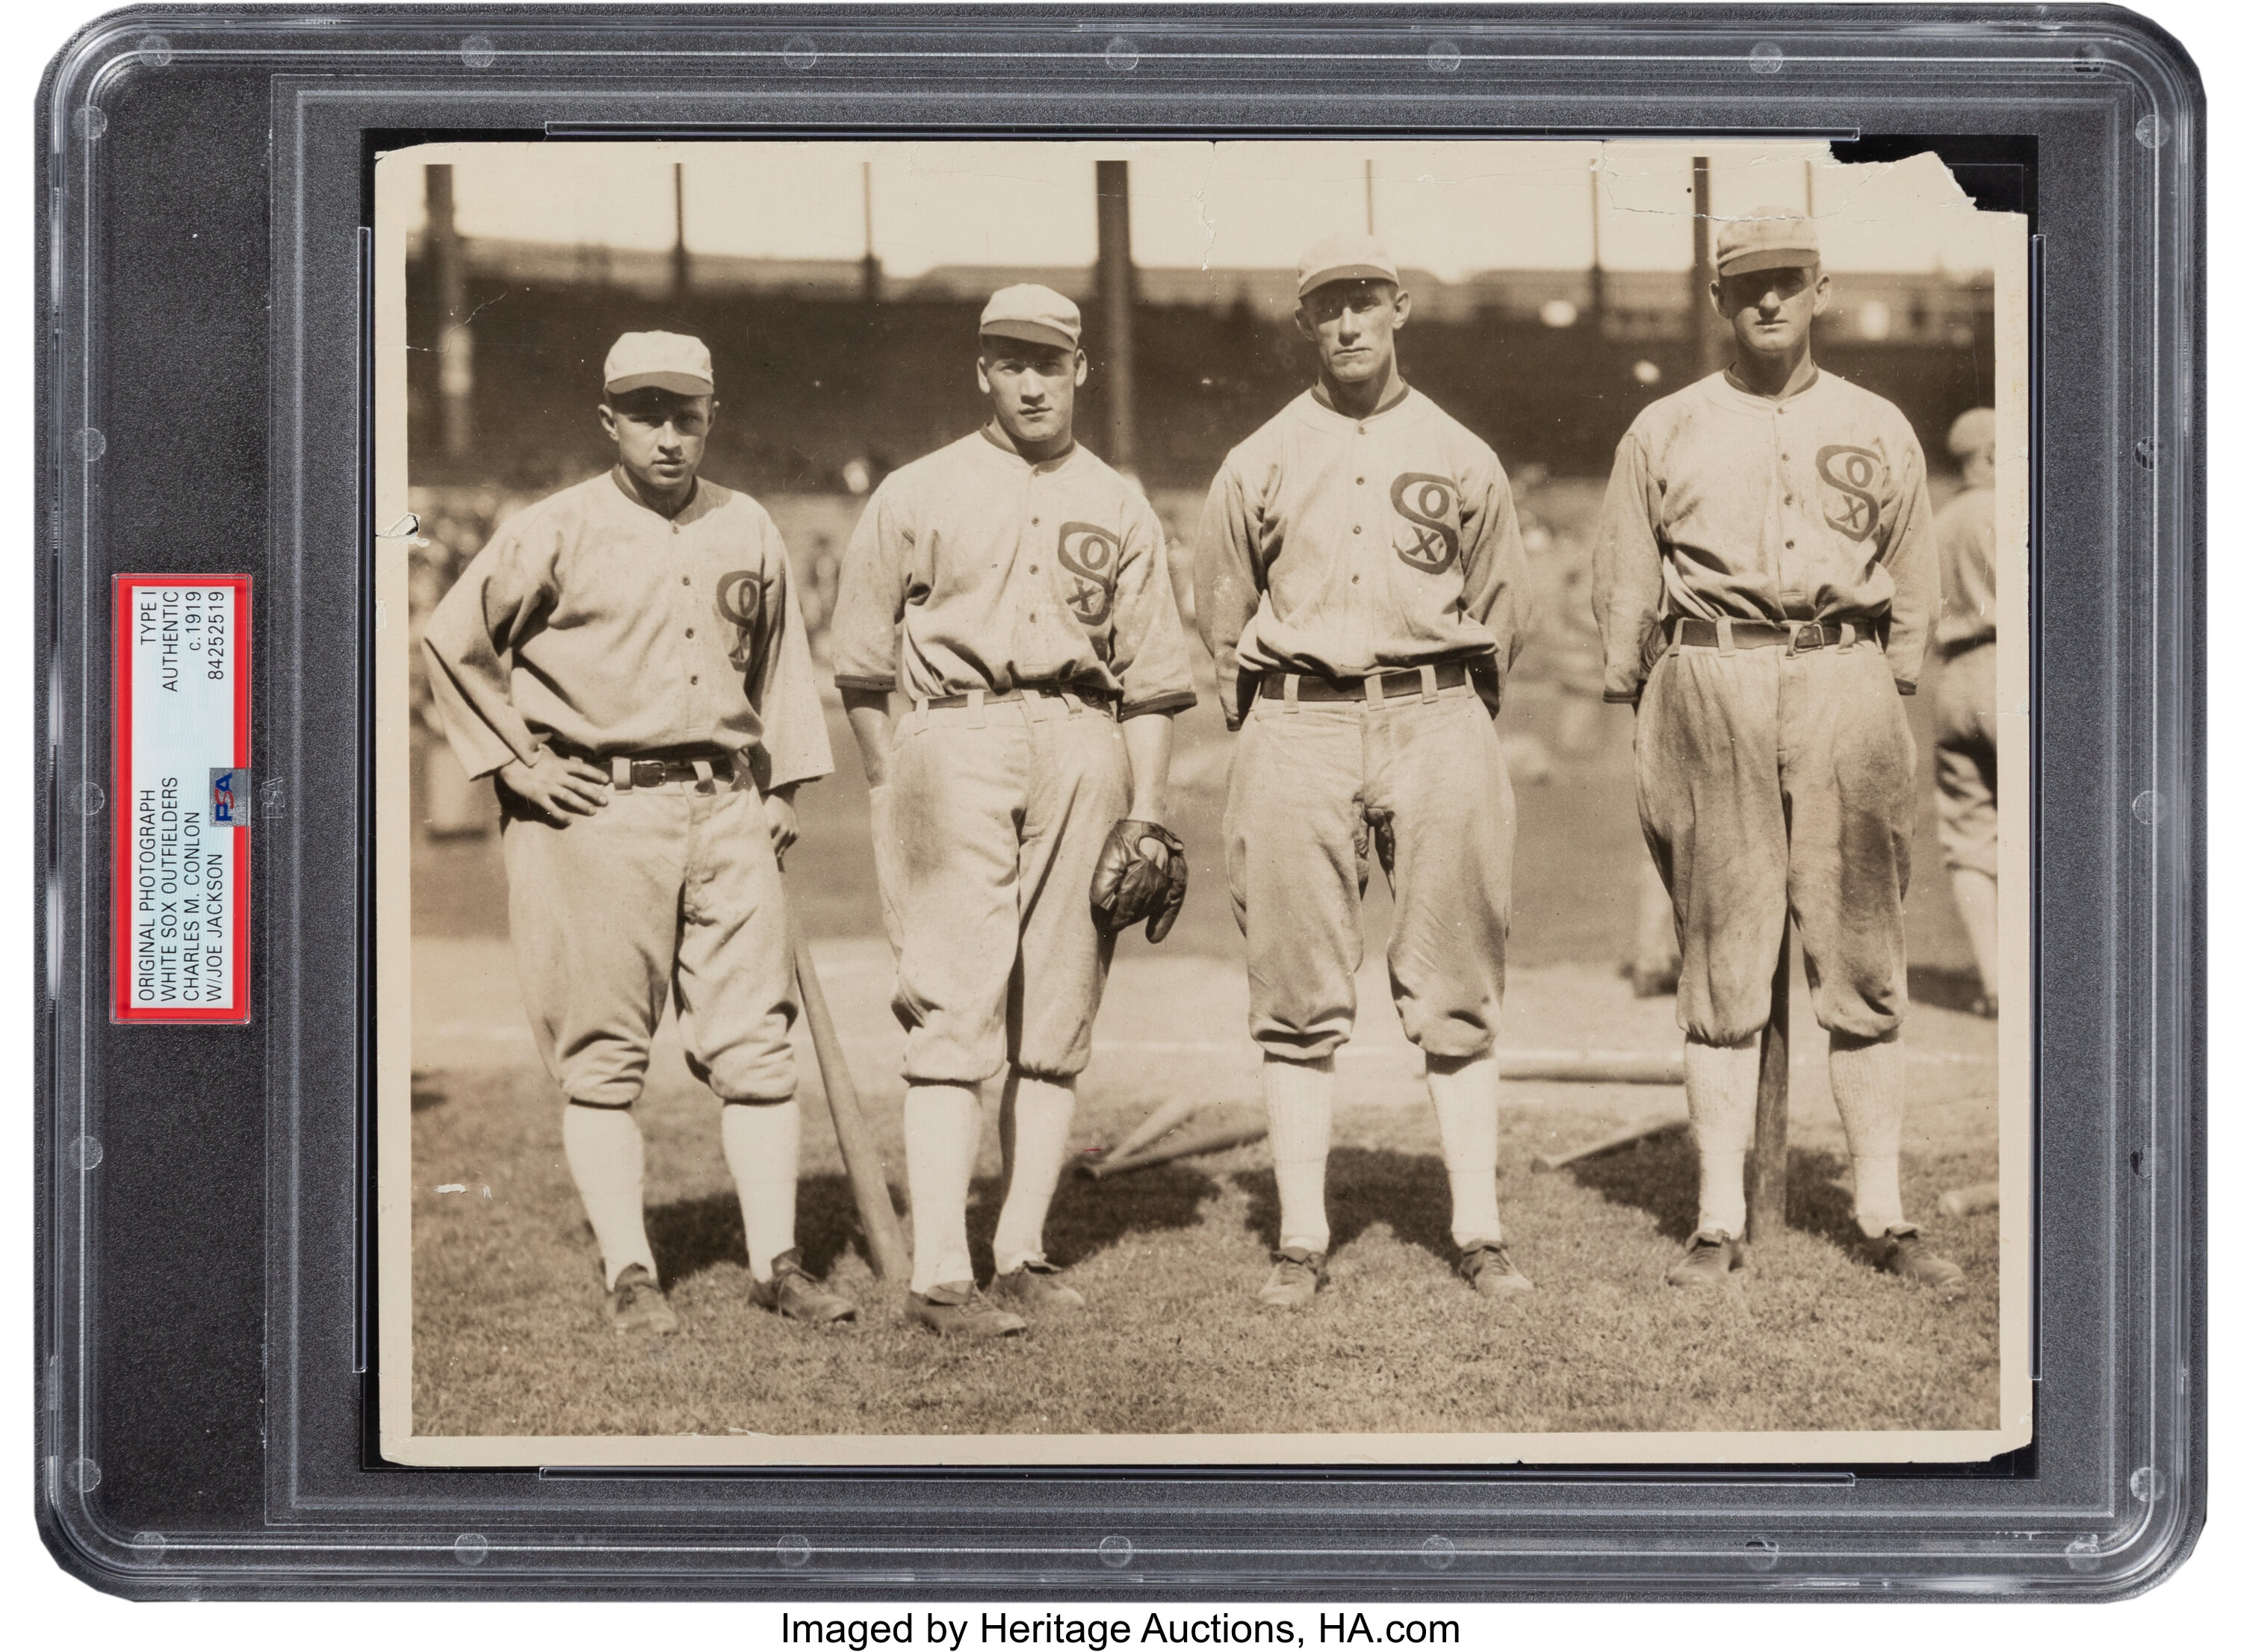 1919 Chicago White Sox Outfield Original News Photograph by Charles, Lot  #59204